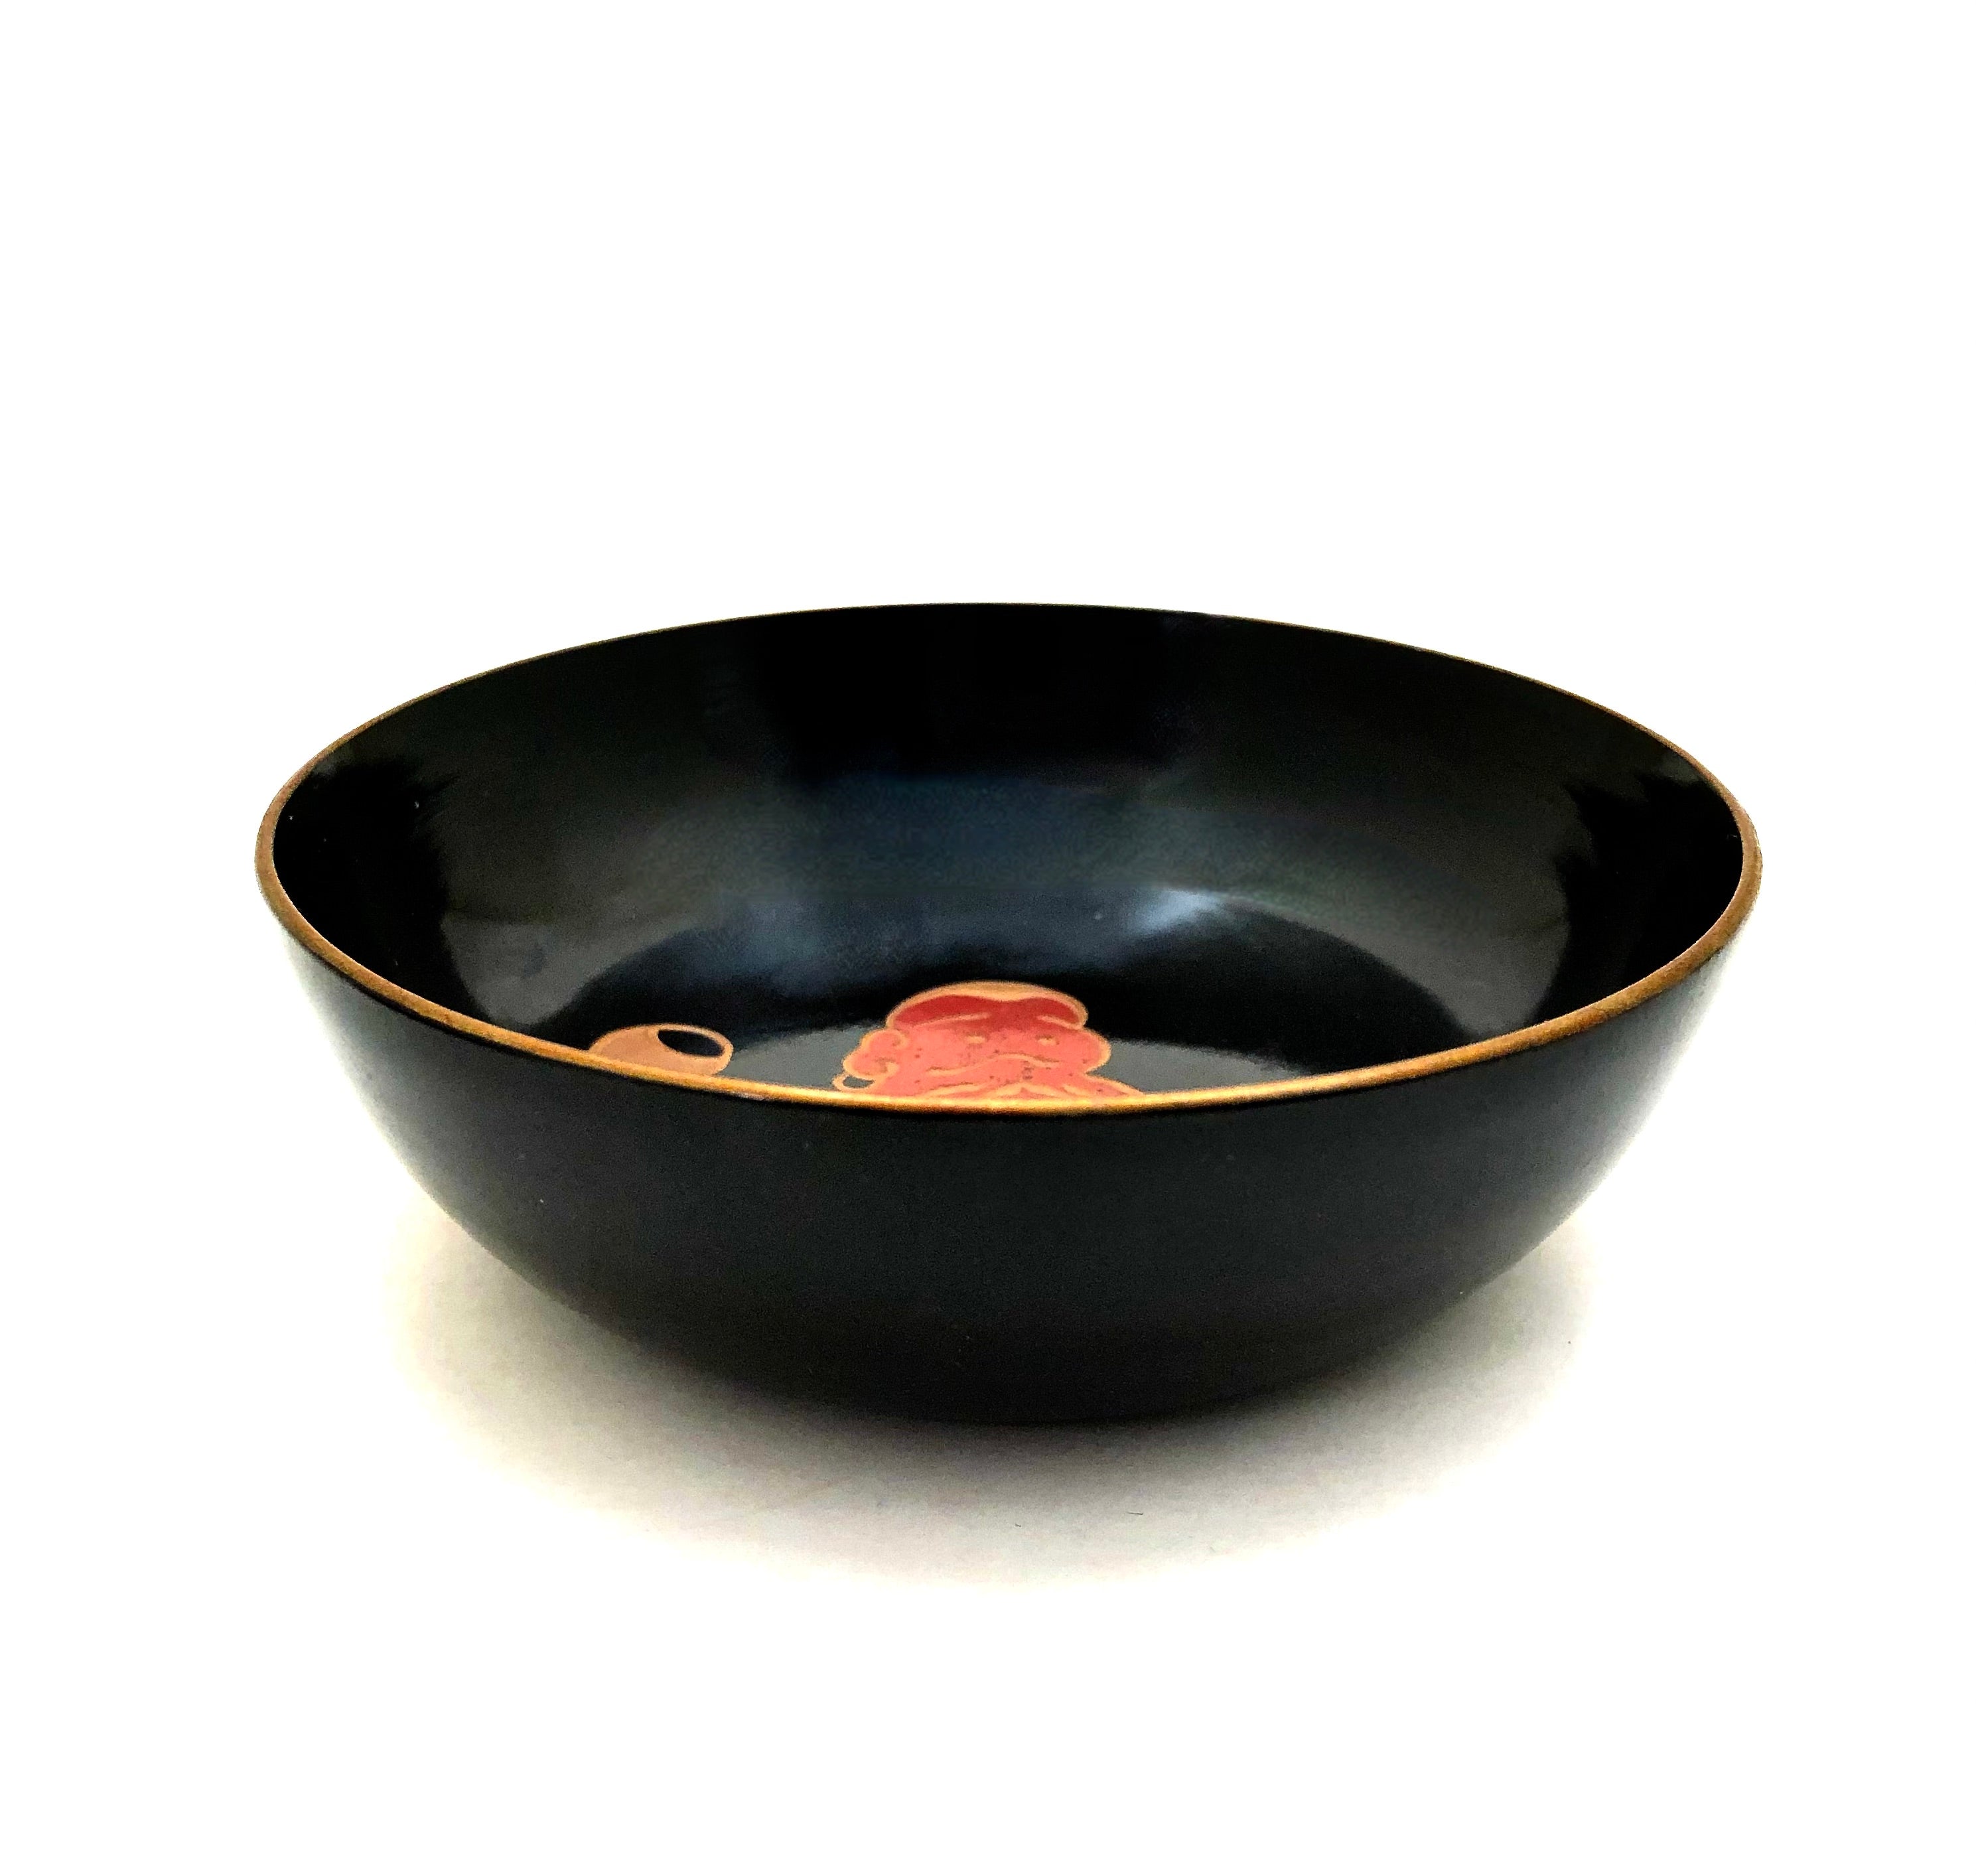 Vintage Japanese Black Lacquer Pickle Bowl with Image of Daruma